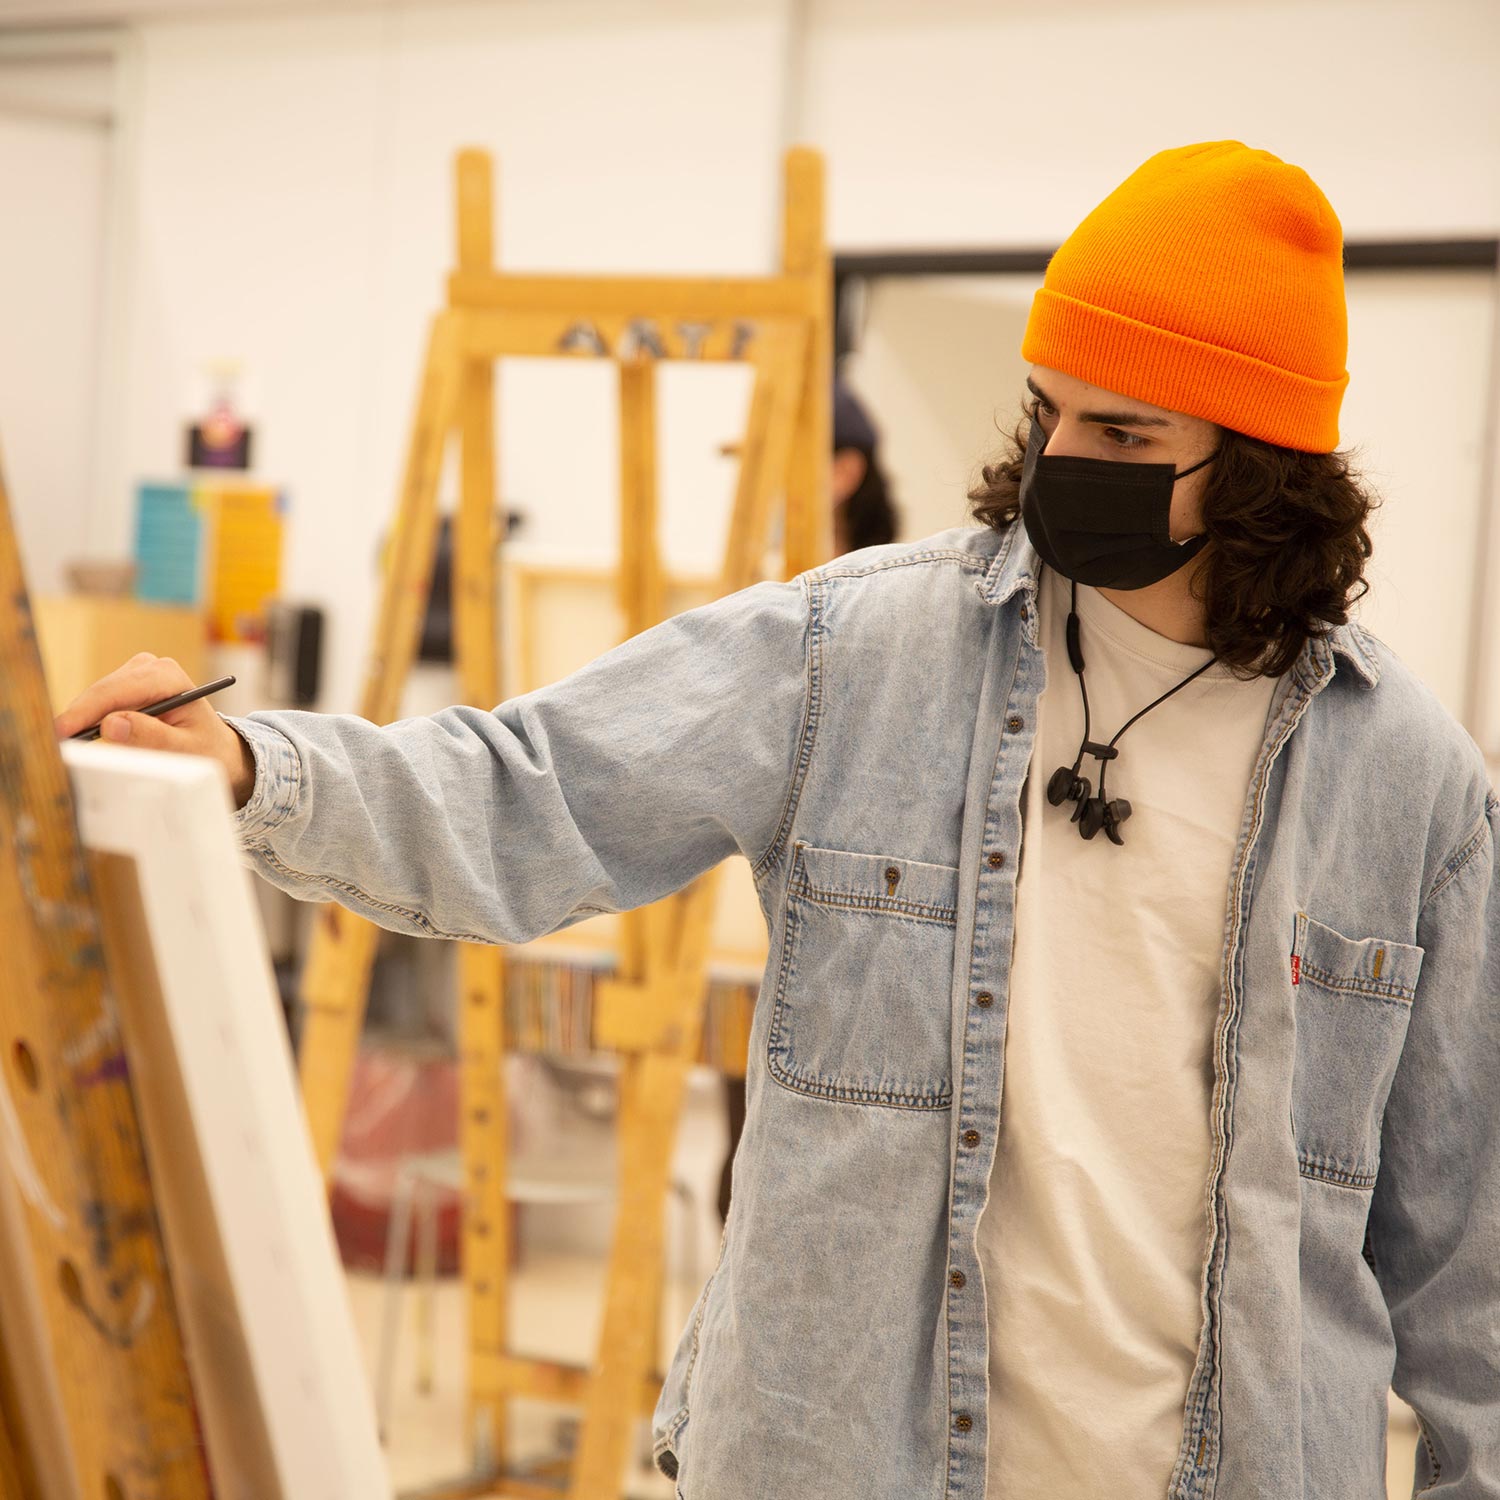 A photo of an art student painting on a canvas.